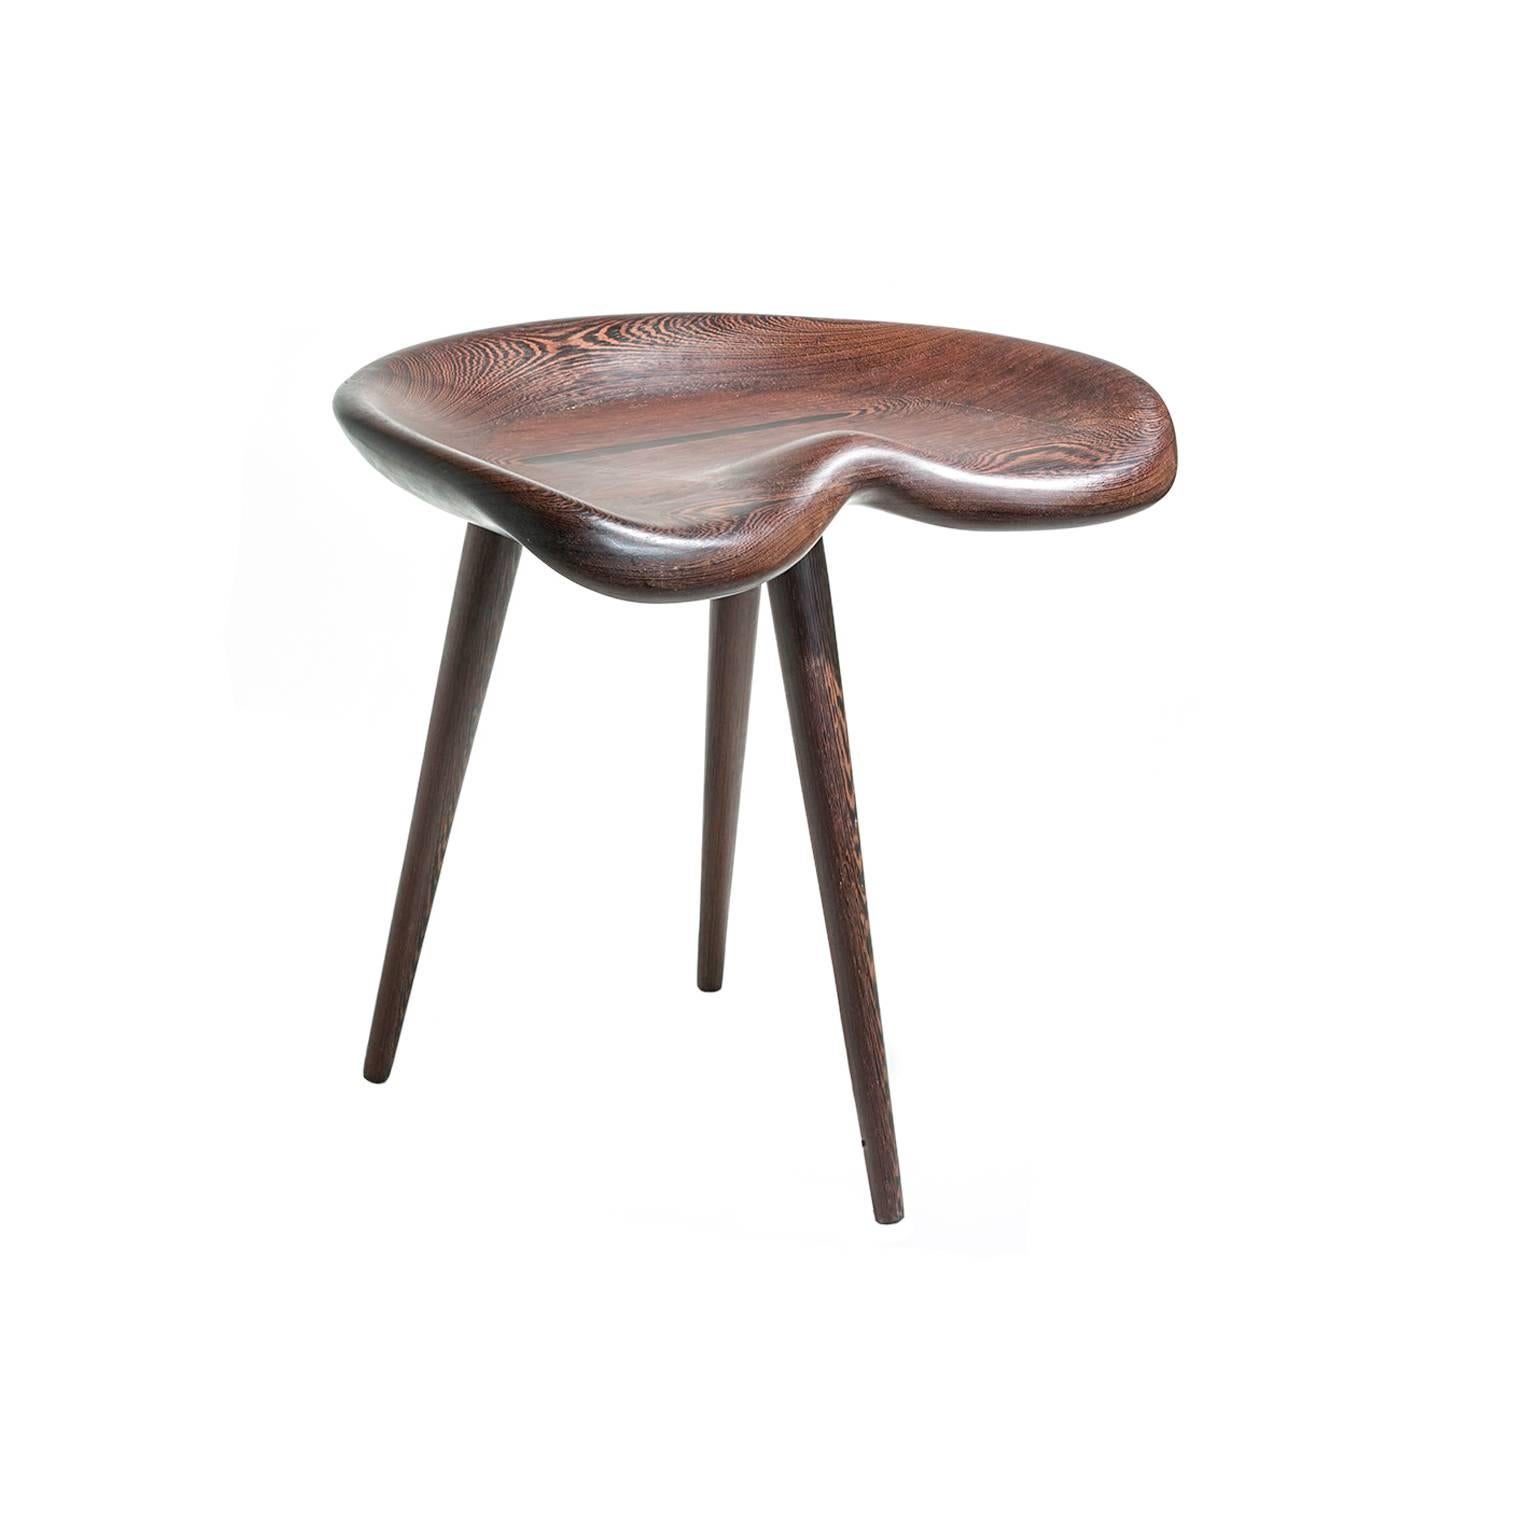 Stingray Stool by Michael Boyd for PLANEfurniture, offered here in Wenge with an oil finish. From the WEDGE series. 

The Wedge series has a softer, more traditional character and may see wider distribution as a result. Slatted lounge chairs,